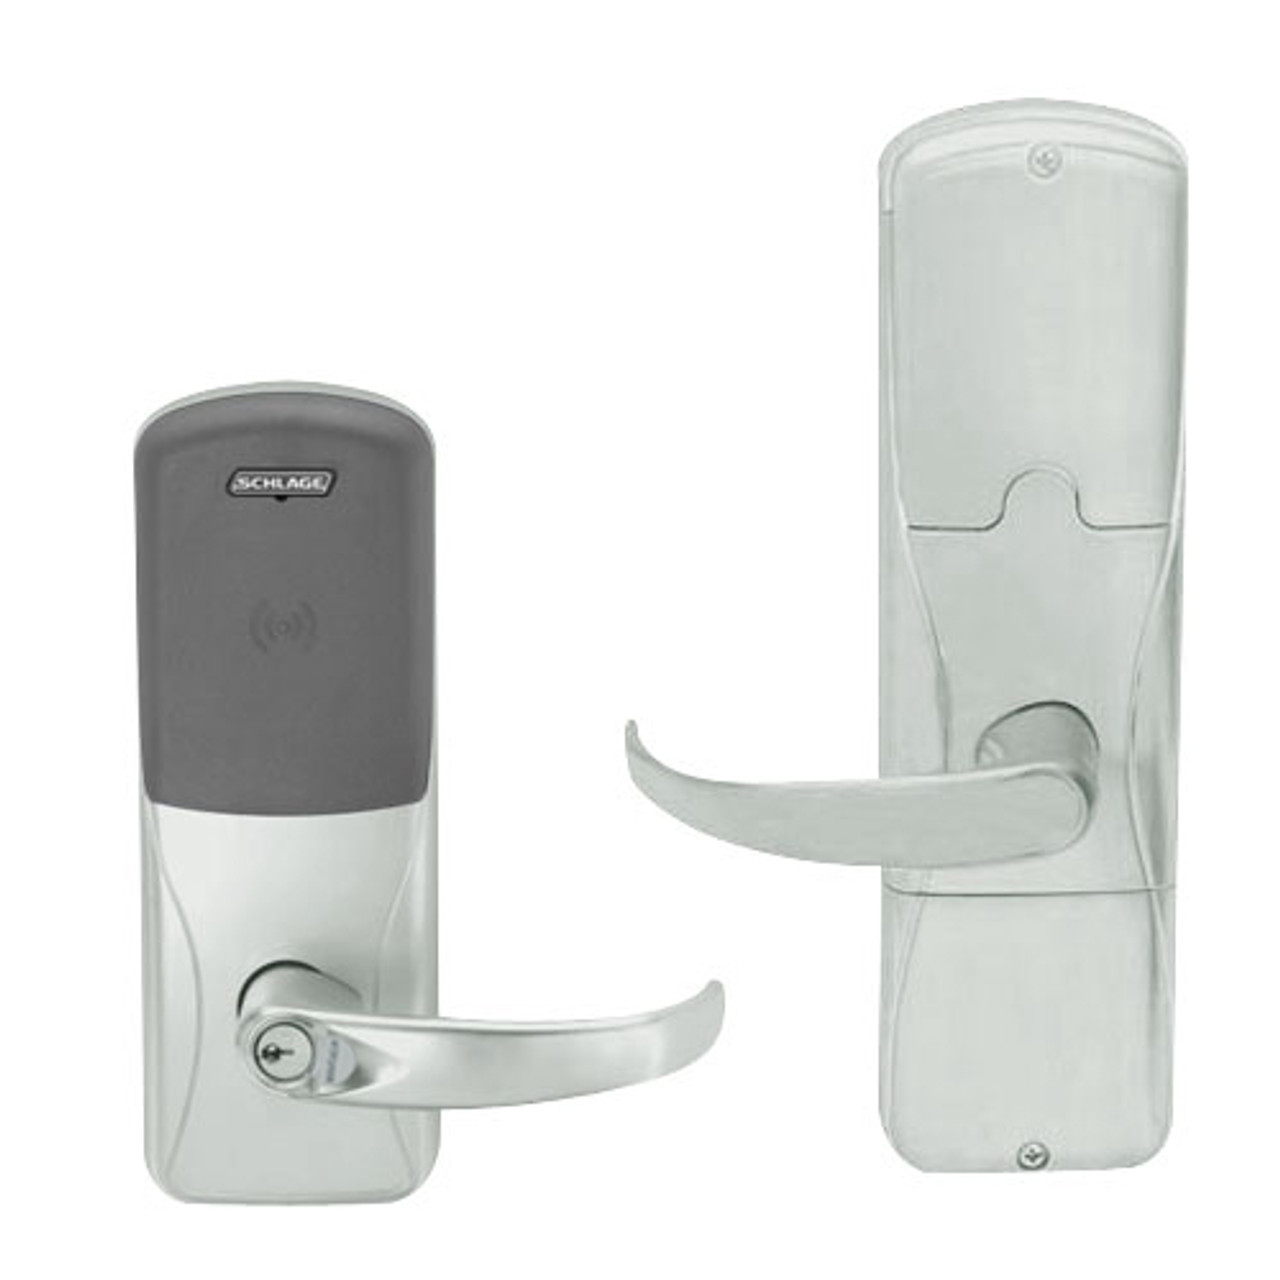 AD200-MD-40-MT-SPA-GD-29R-619 Schlage Privacy Mortise Deadbolt Multi-Technology Lock with Sparta Lever in Satin Nickel